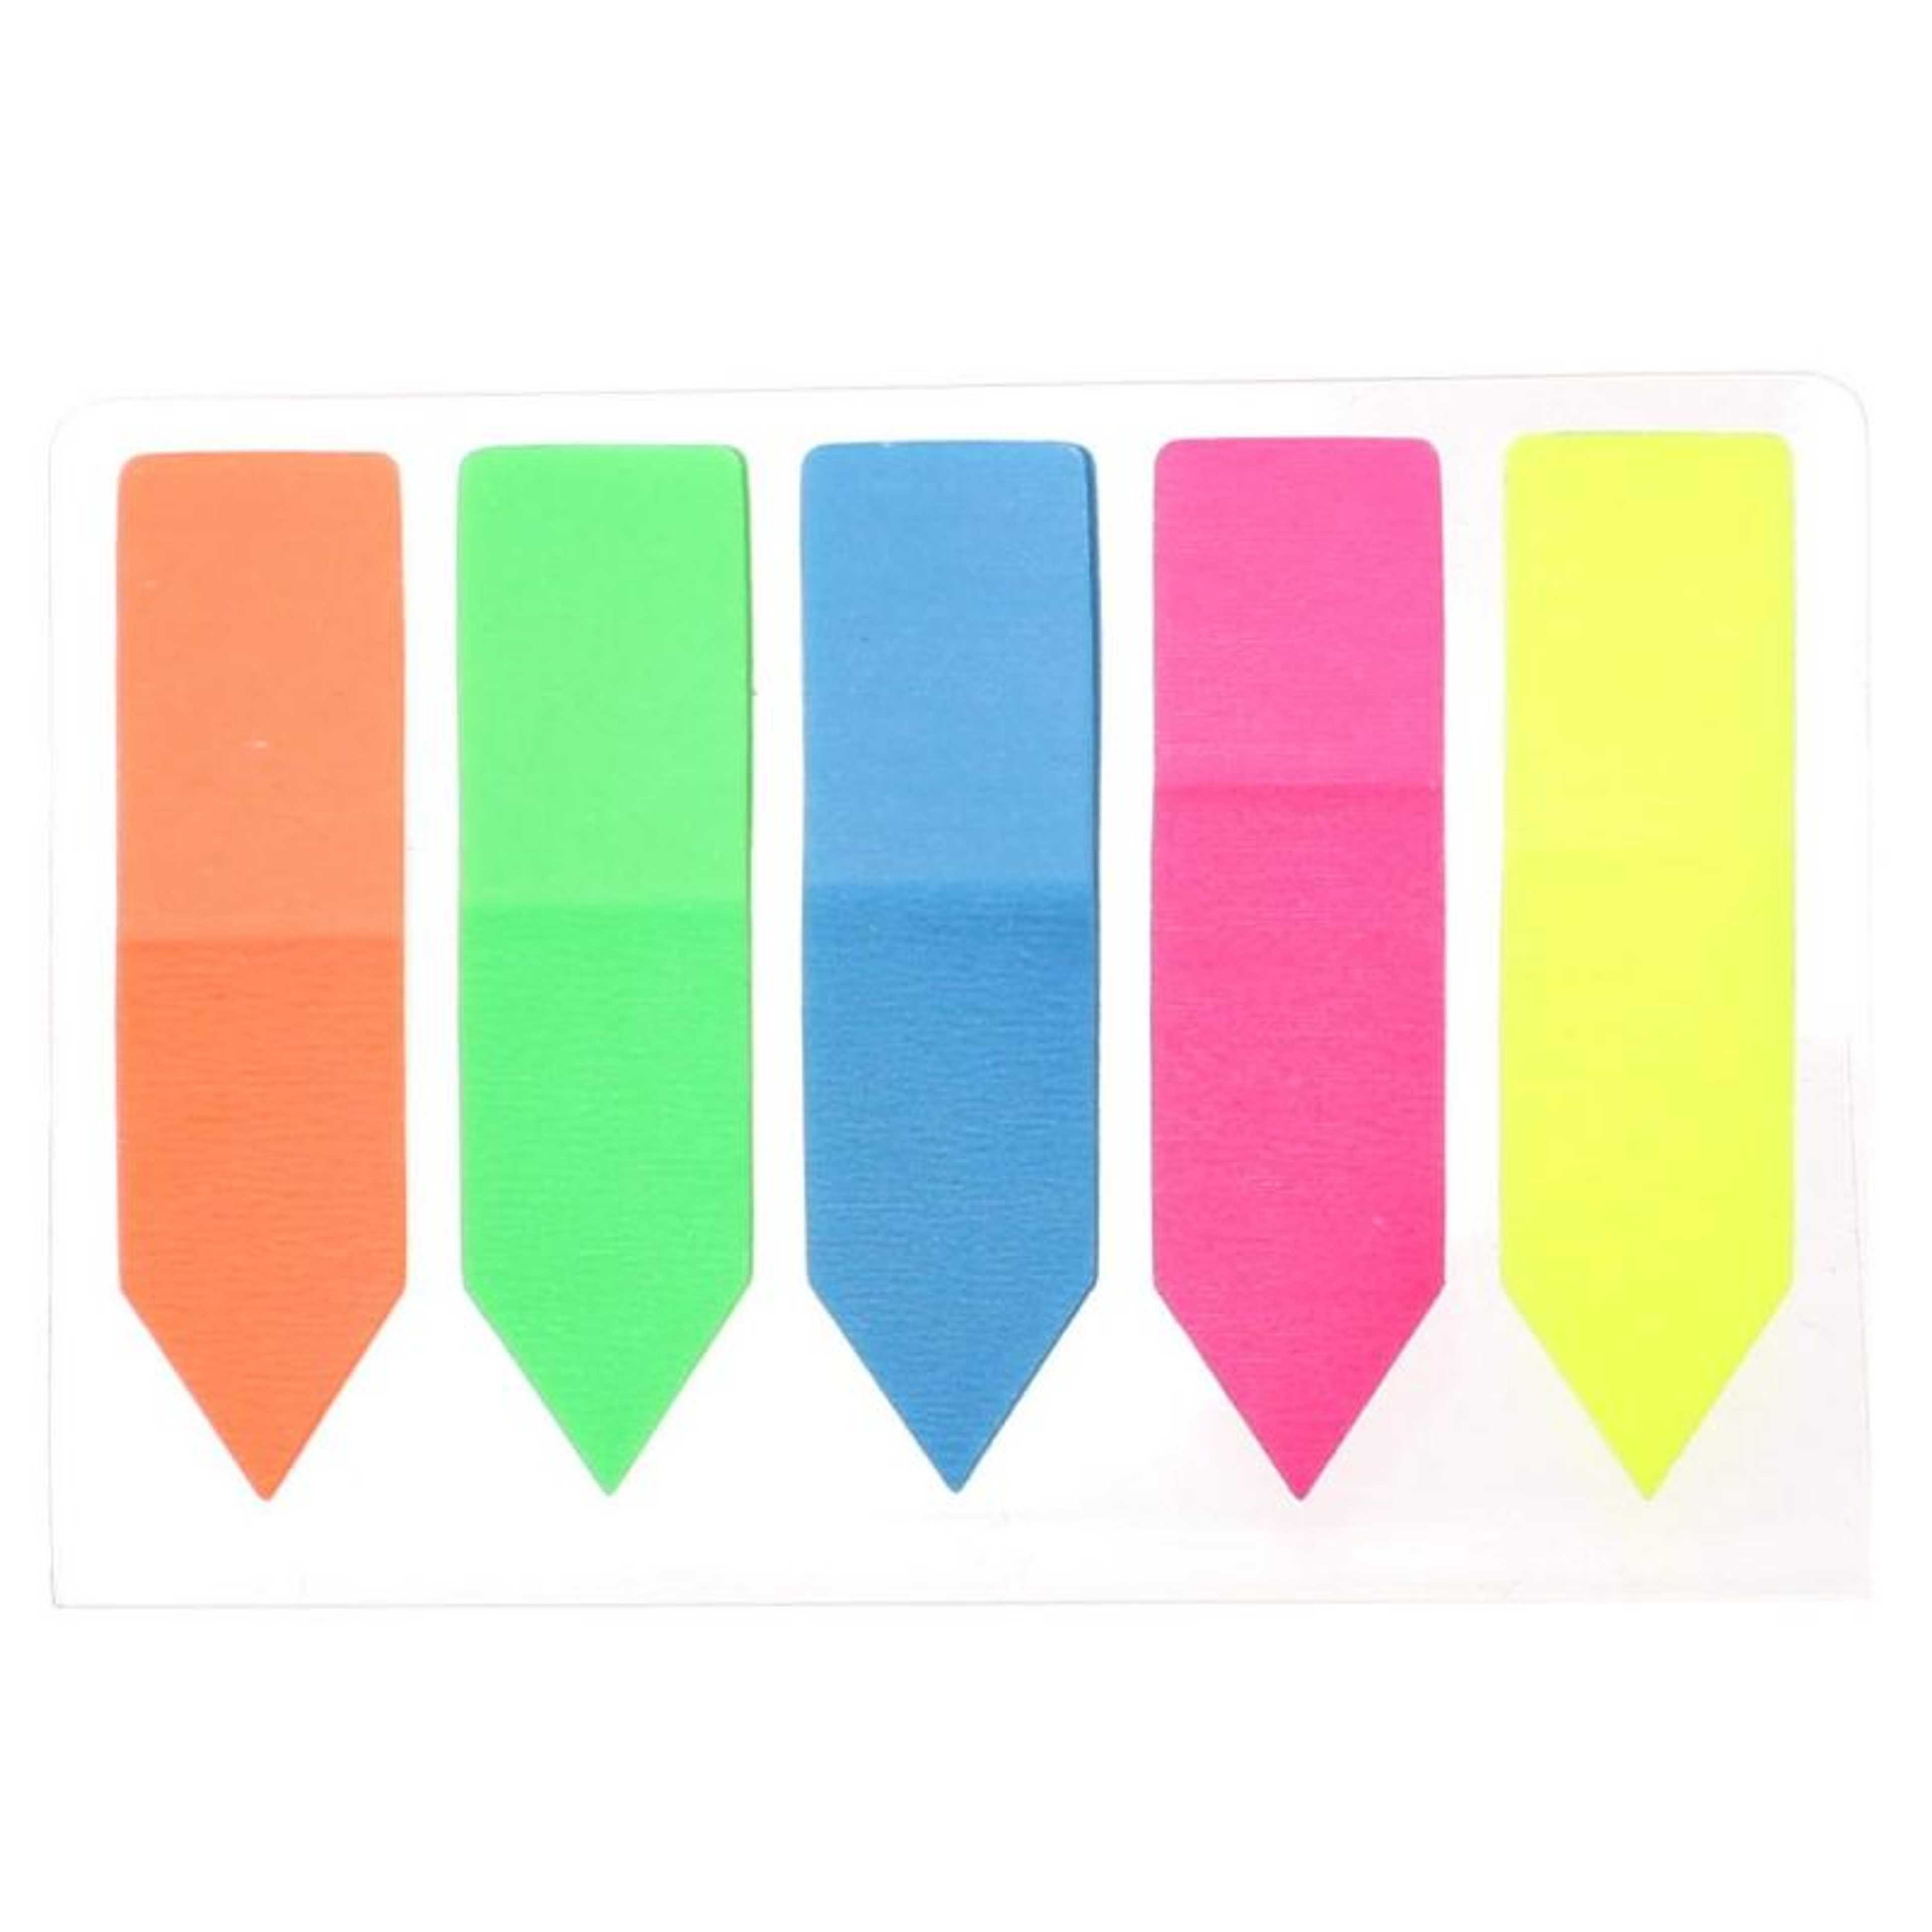 Pack of 5 - Mixed Neon Arrow Index Sticky Notes